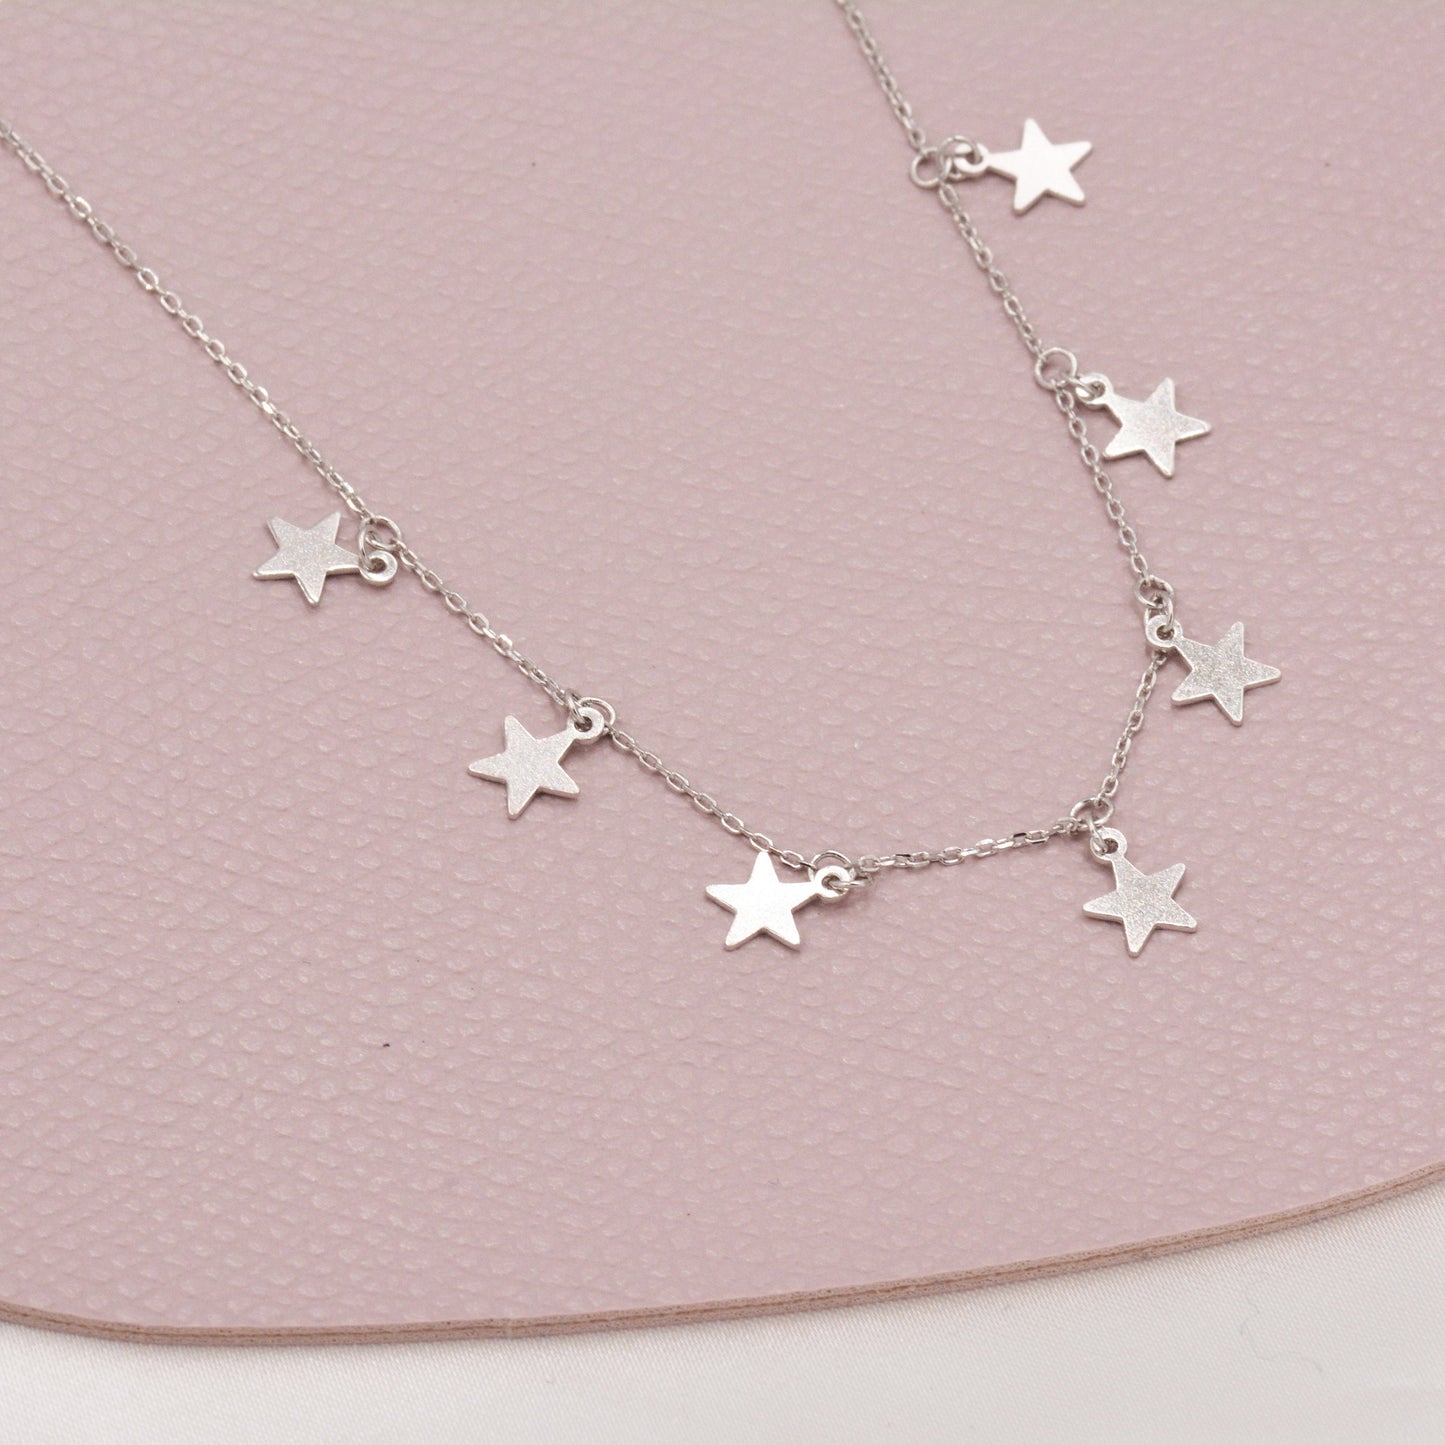 Star Choker Necklace in Sterling Silver, Silver or Gold, Star Collar Necklace, Short Necklace